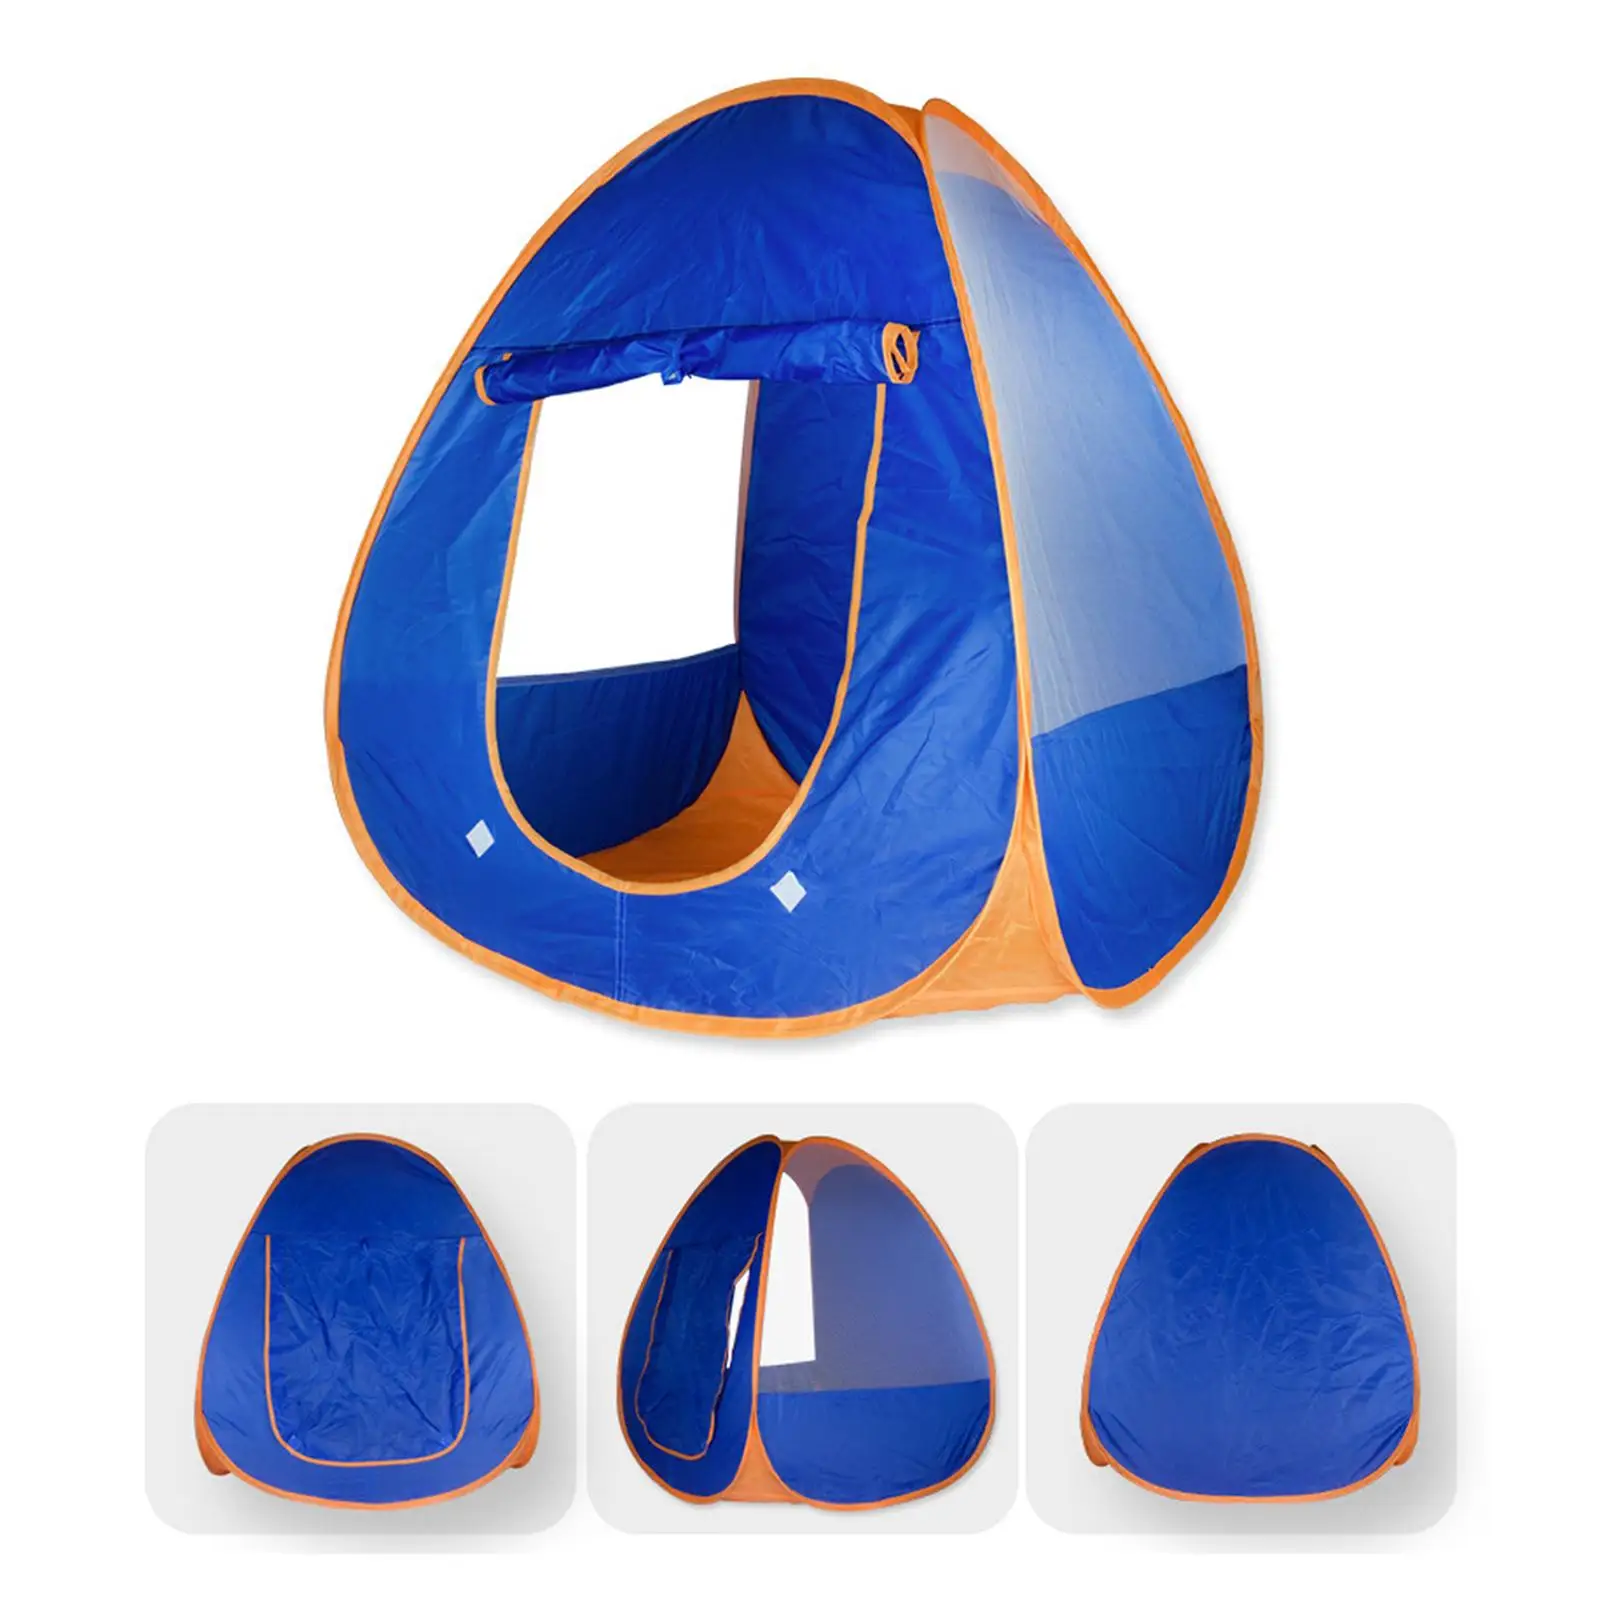 Kids Play Tent Collapsible Portable Christmas Gifts Child Room Decoration for Game Indoor Outdoor Nursery Room Home Beach